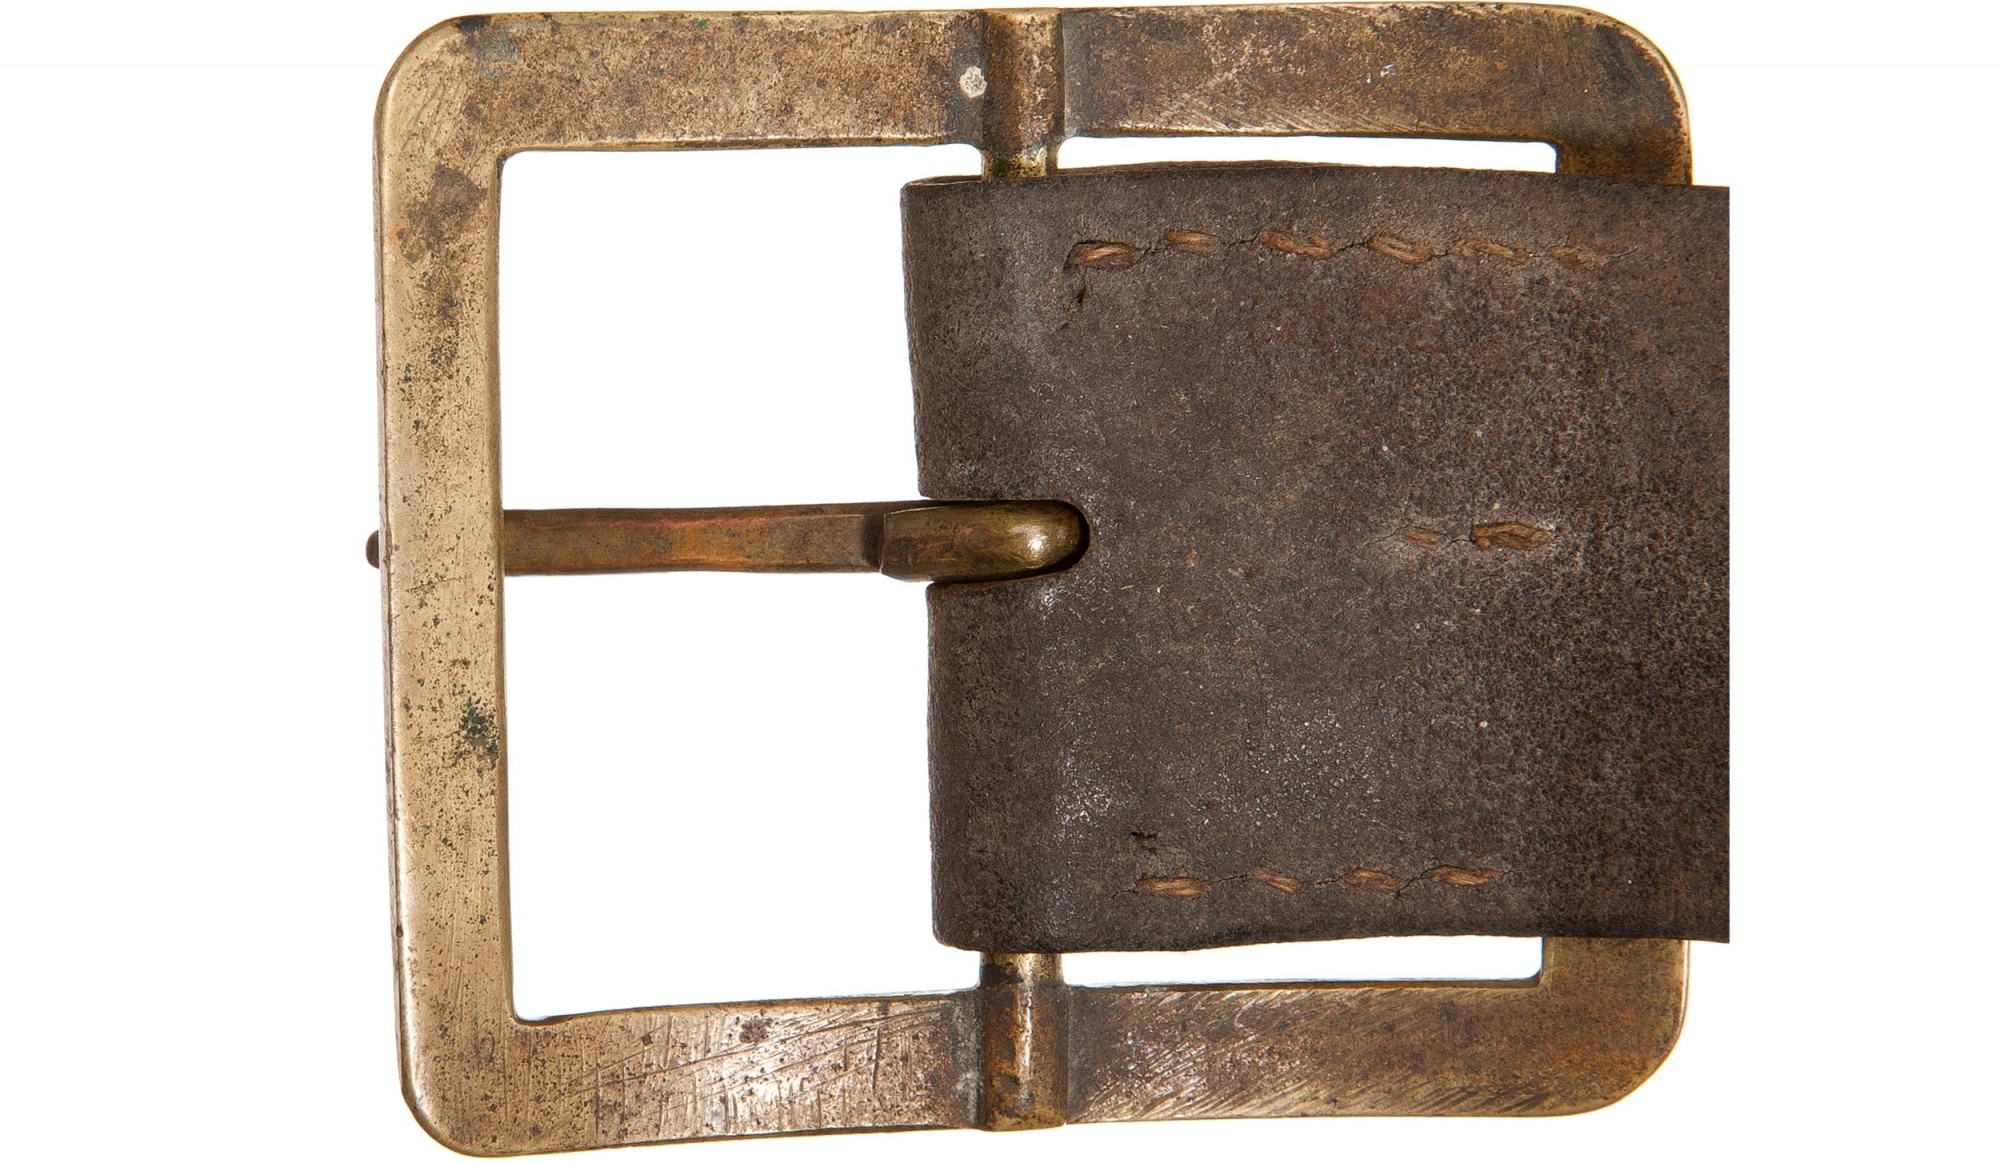 FINE, NON-DUG, GETTYSBURG-RECOVERED CONFEDERATE LEATHER WAIST BELT WITH ...